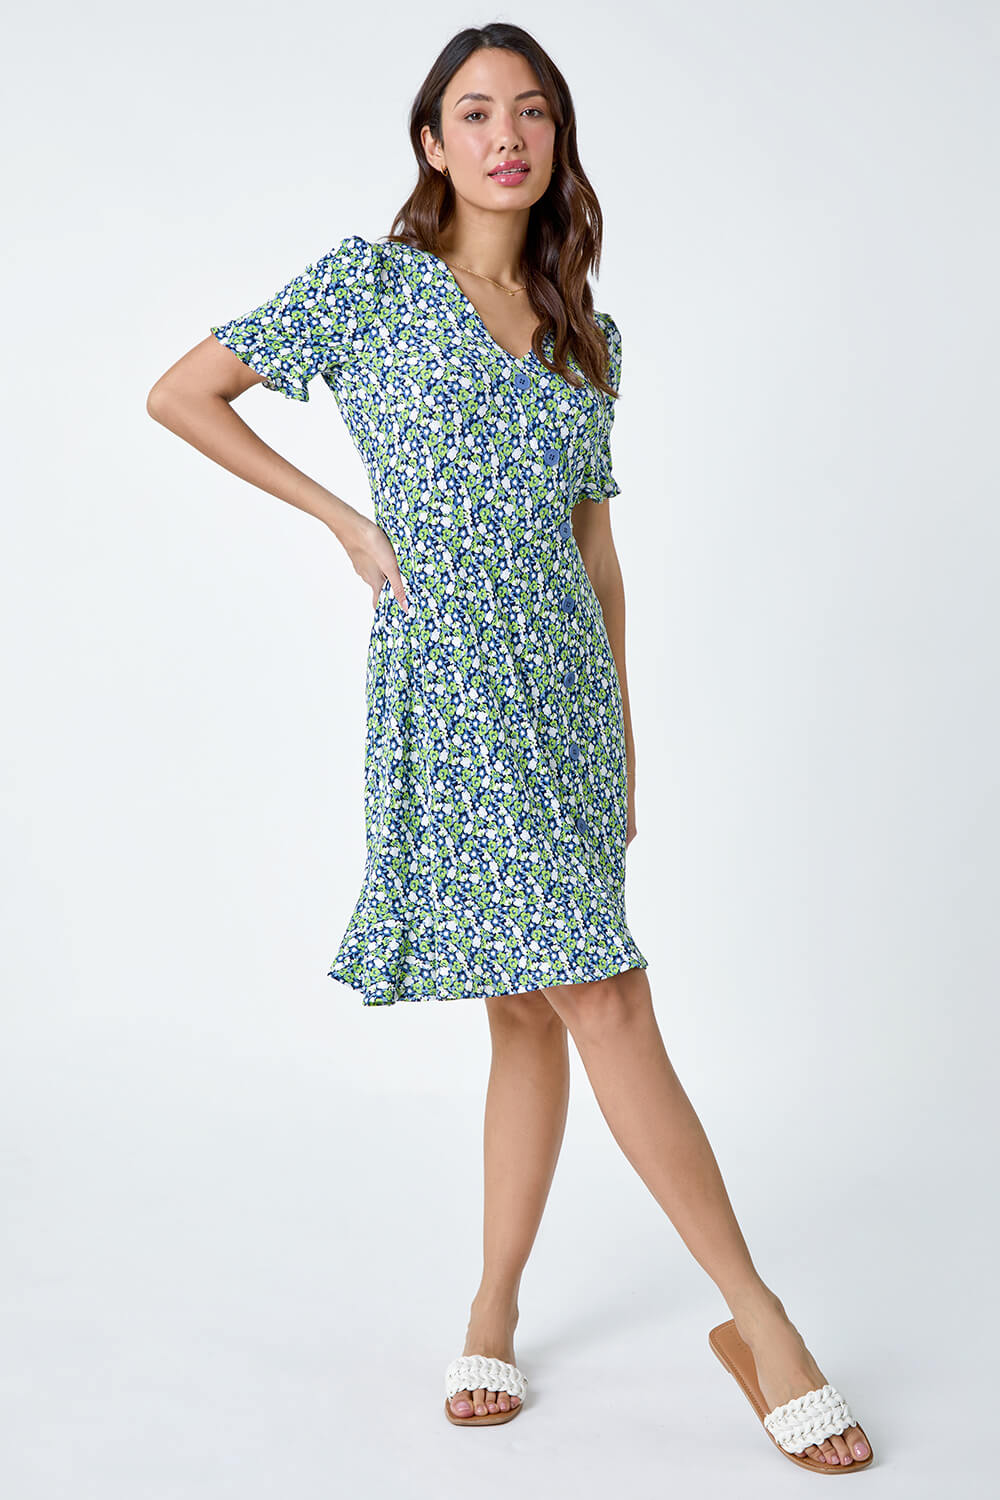 Green Ditsy Floral Side Button Dress, Image 2 of 5